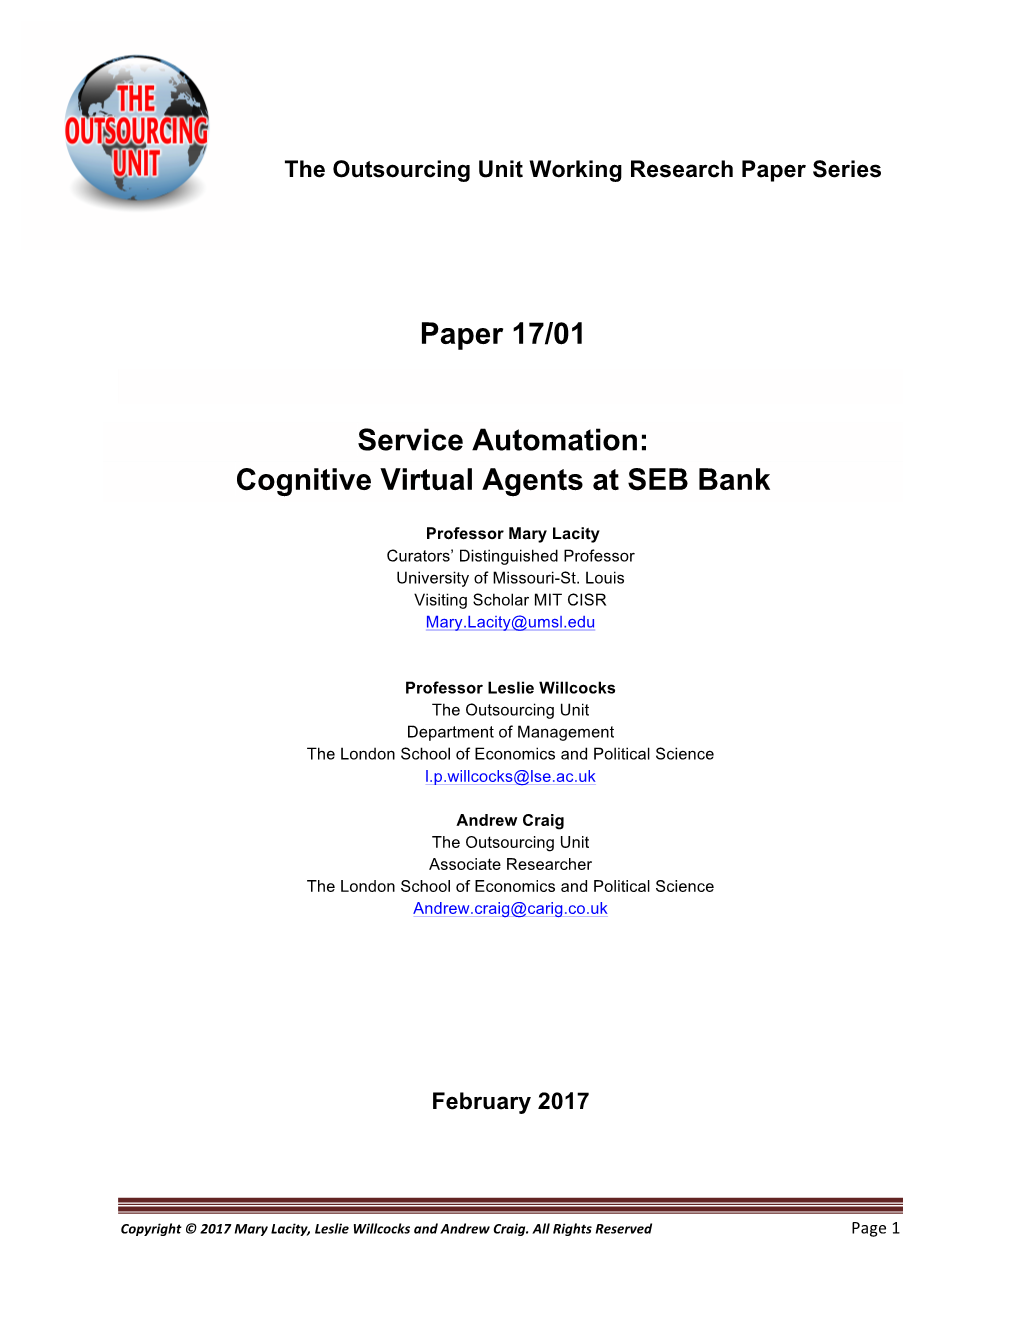 Paper 17/01 Service Automation: Cognitive Virtual Agents at SEB Bank